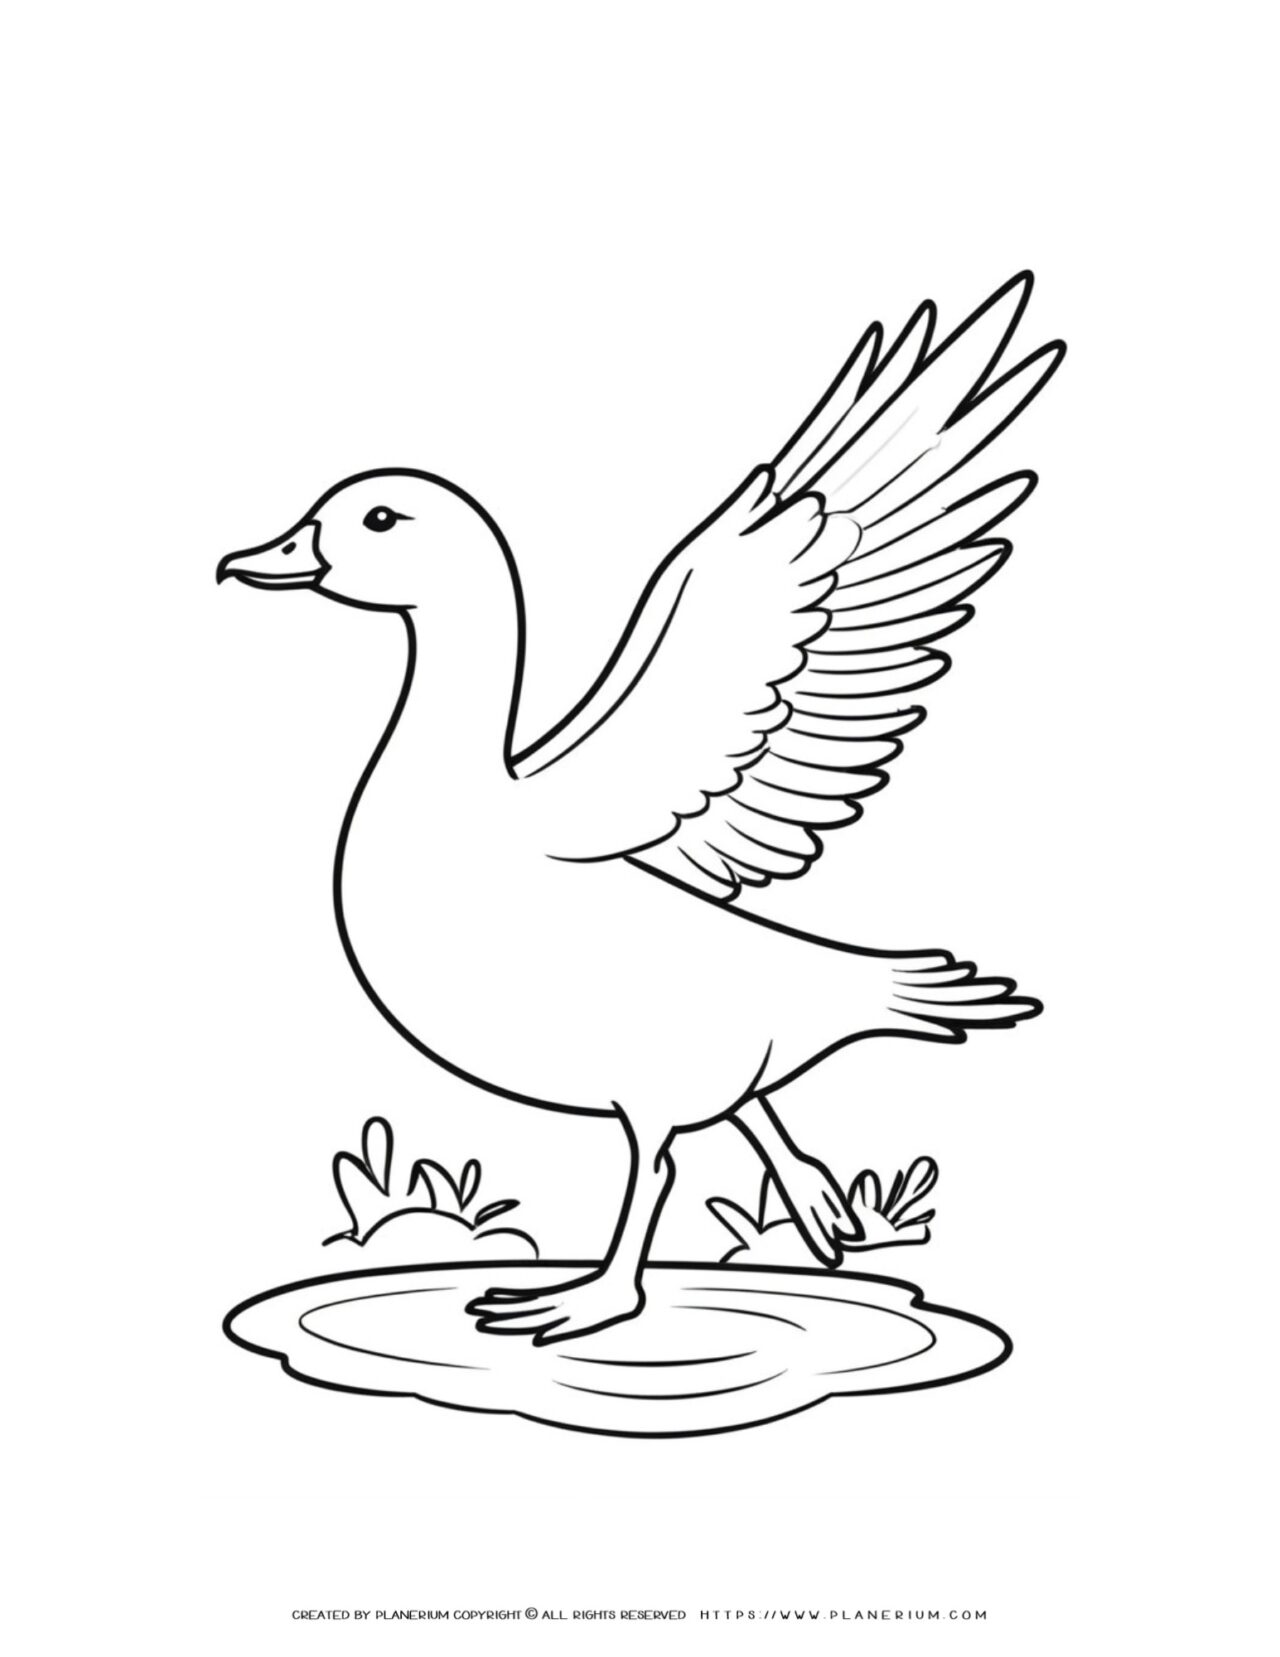 goose-open-wings-side-view-coloring-page-for-kids